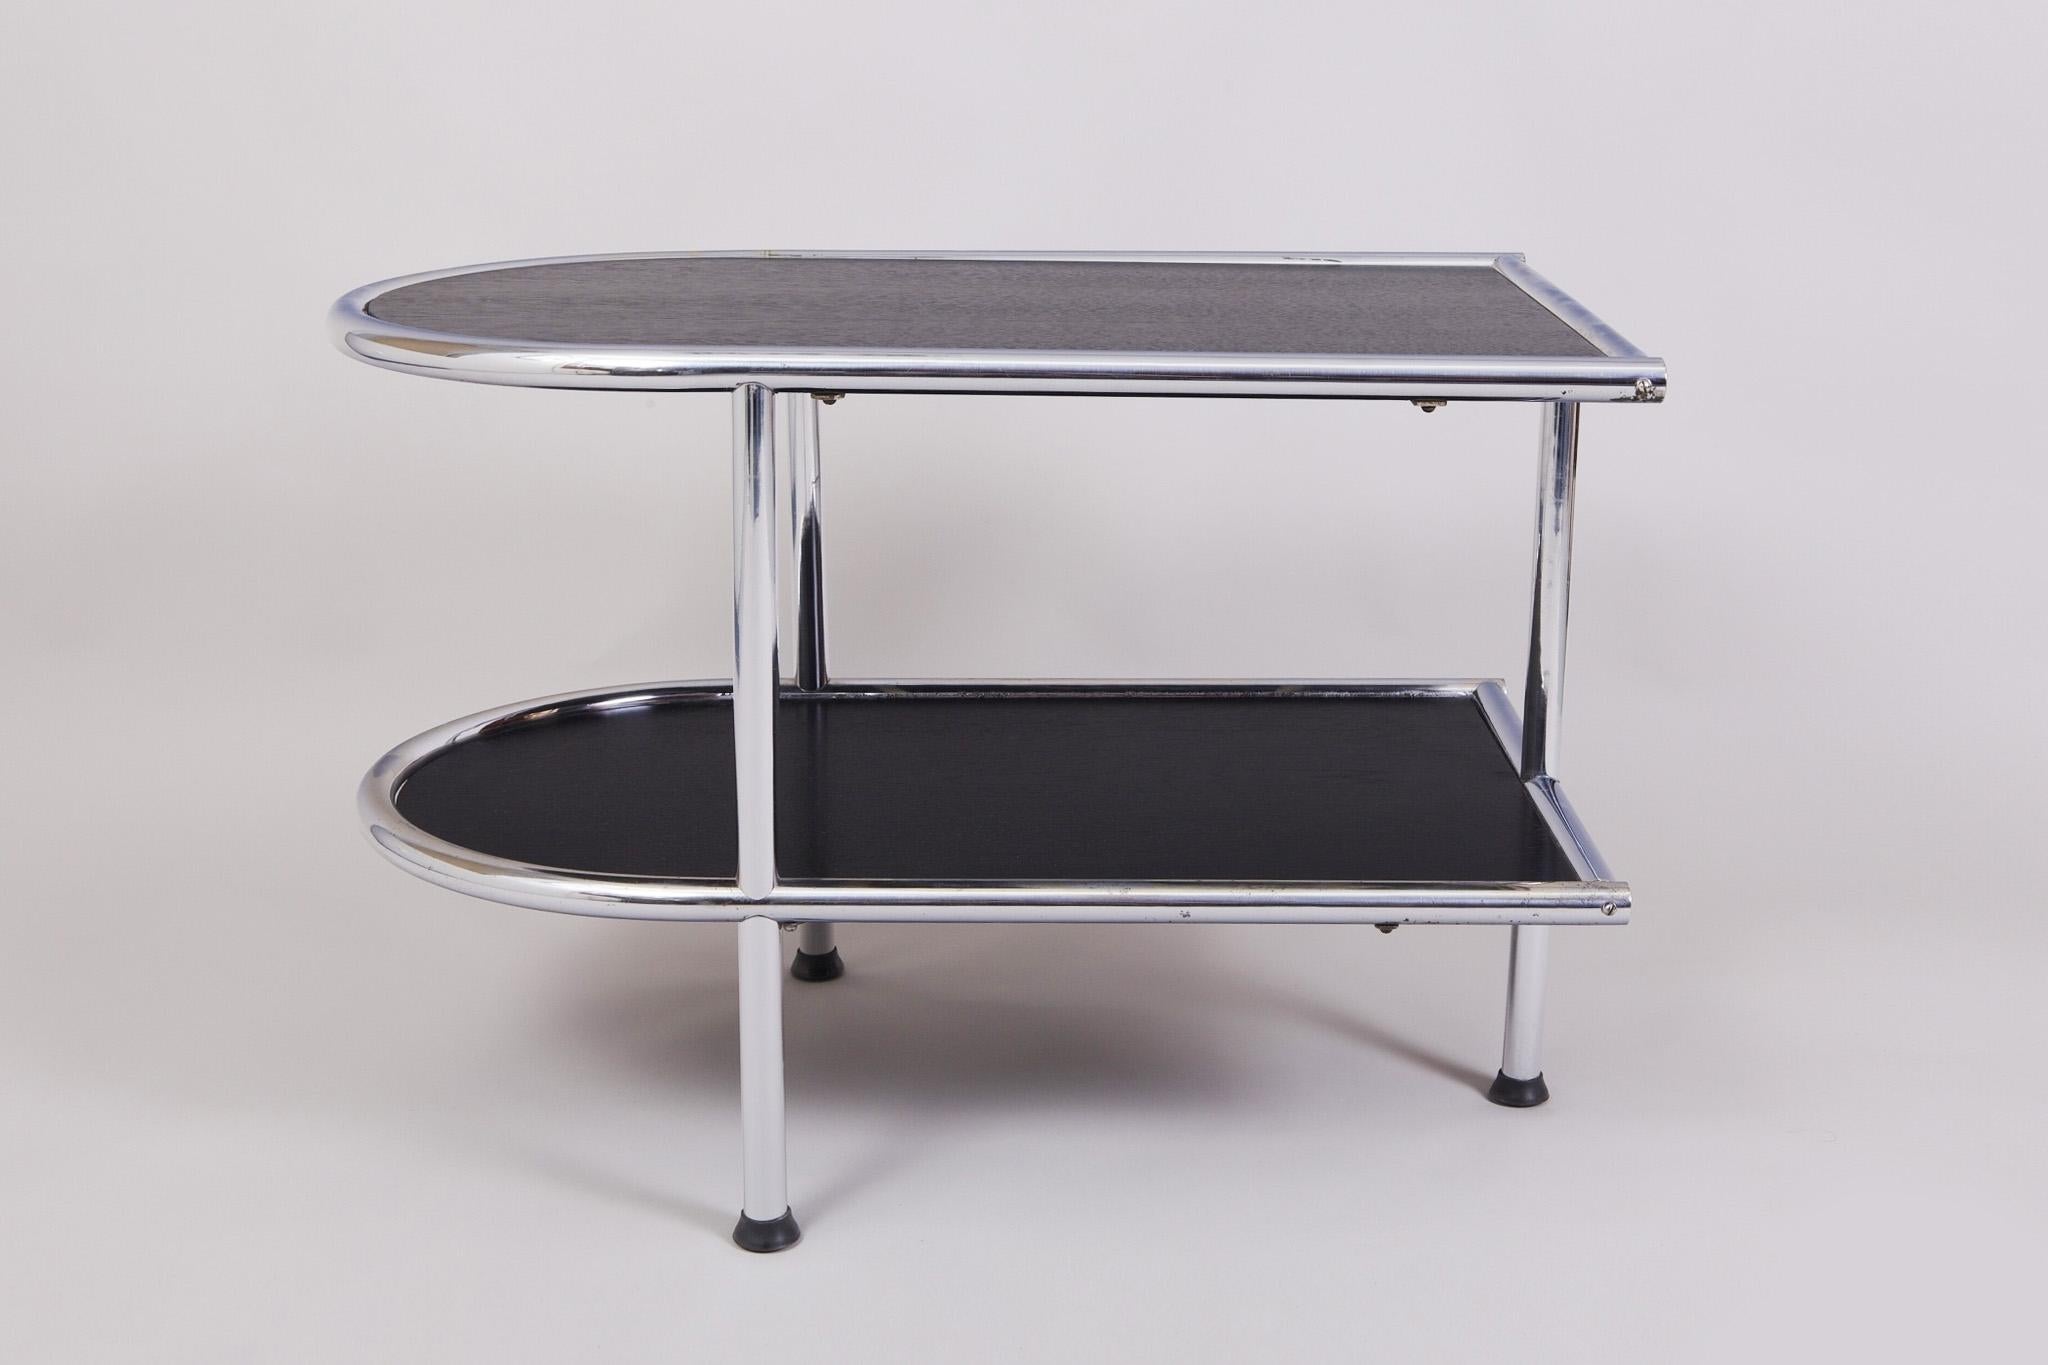 Functionalism German table.
Completely restored. 
Combination of chrome and oak with matt finish and opened pore. Bauhaus style.

We guarantee safe a the cheapest air transport from Europe to the whole world within 7 days.
The price is the same